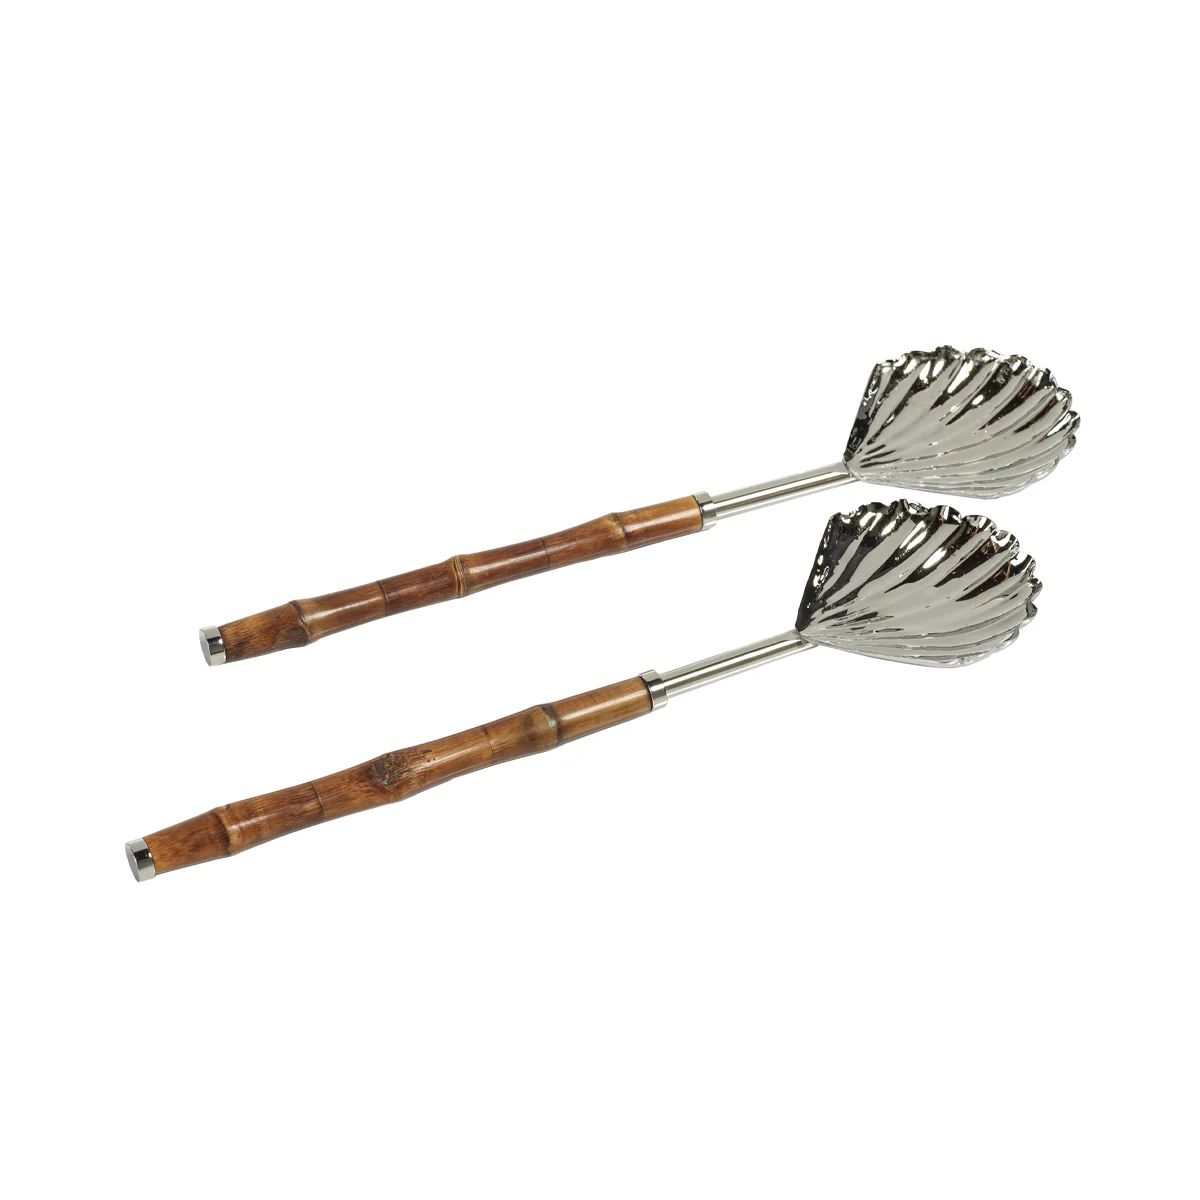 Bamboo and Nickel Servers | Tuesday Made